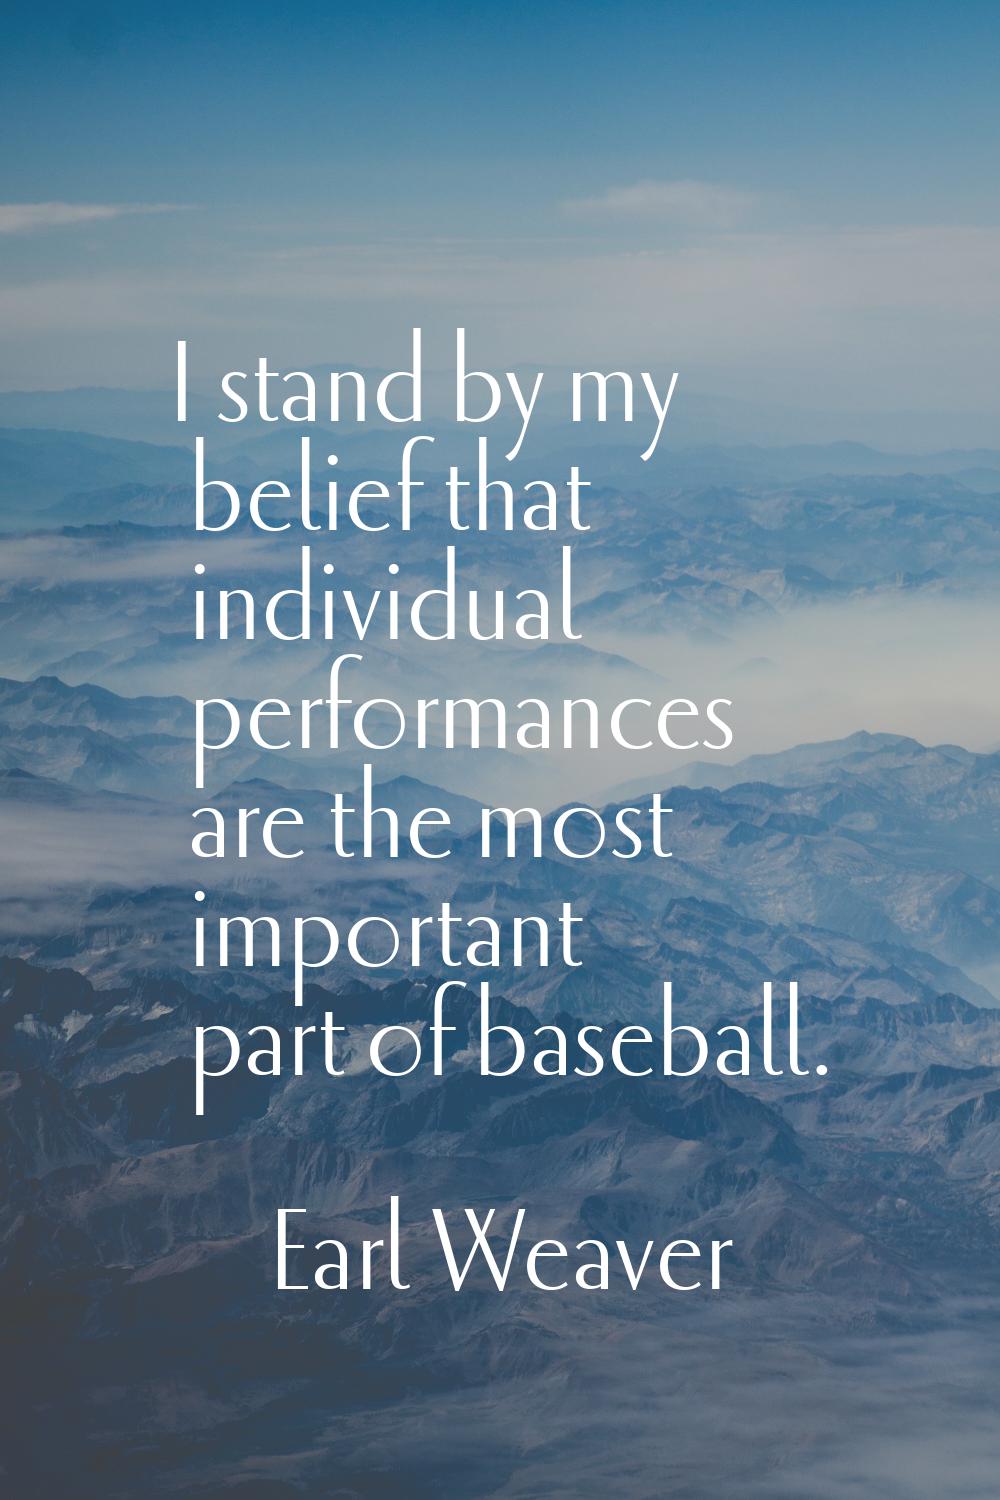 I stand by my belief that individual performances are the most important part of baseball.